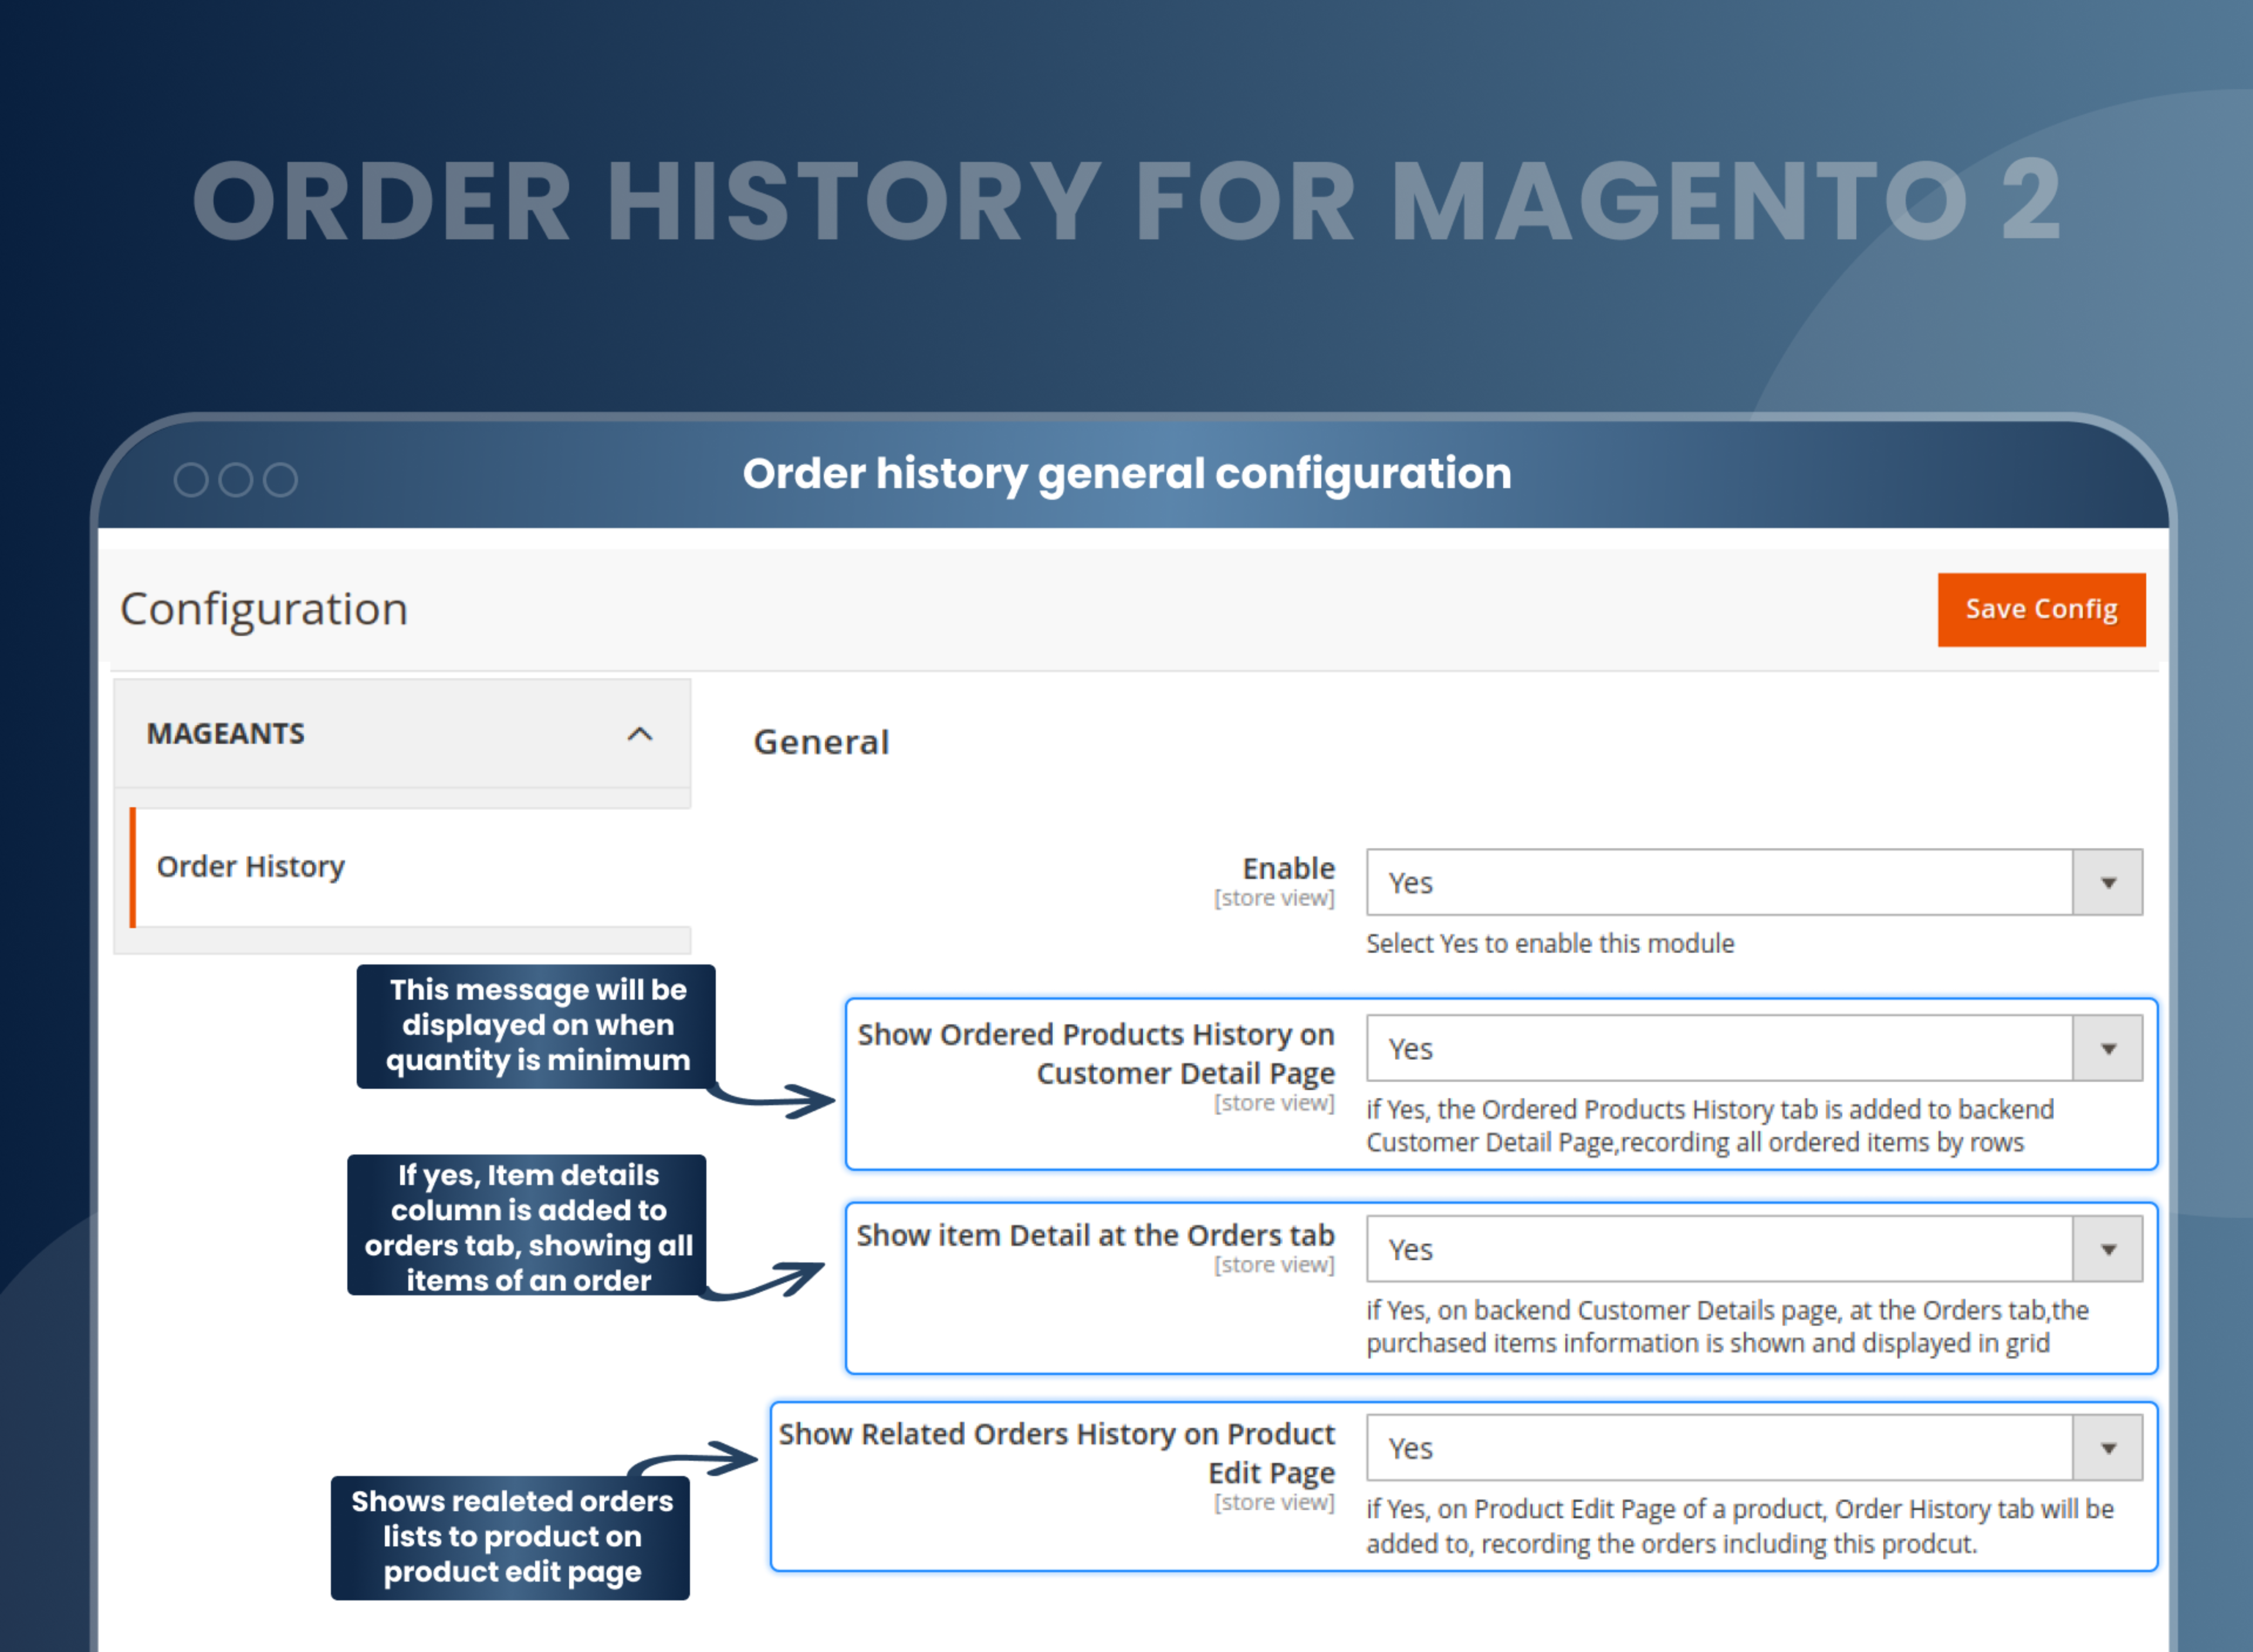 Order history general configuration